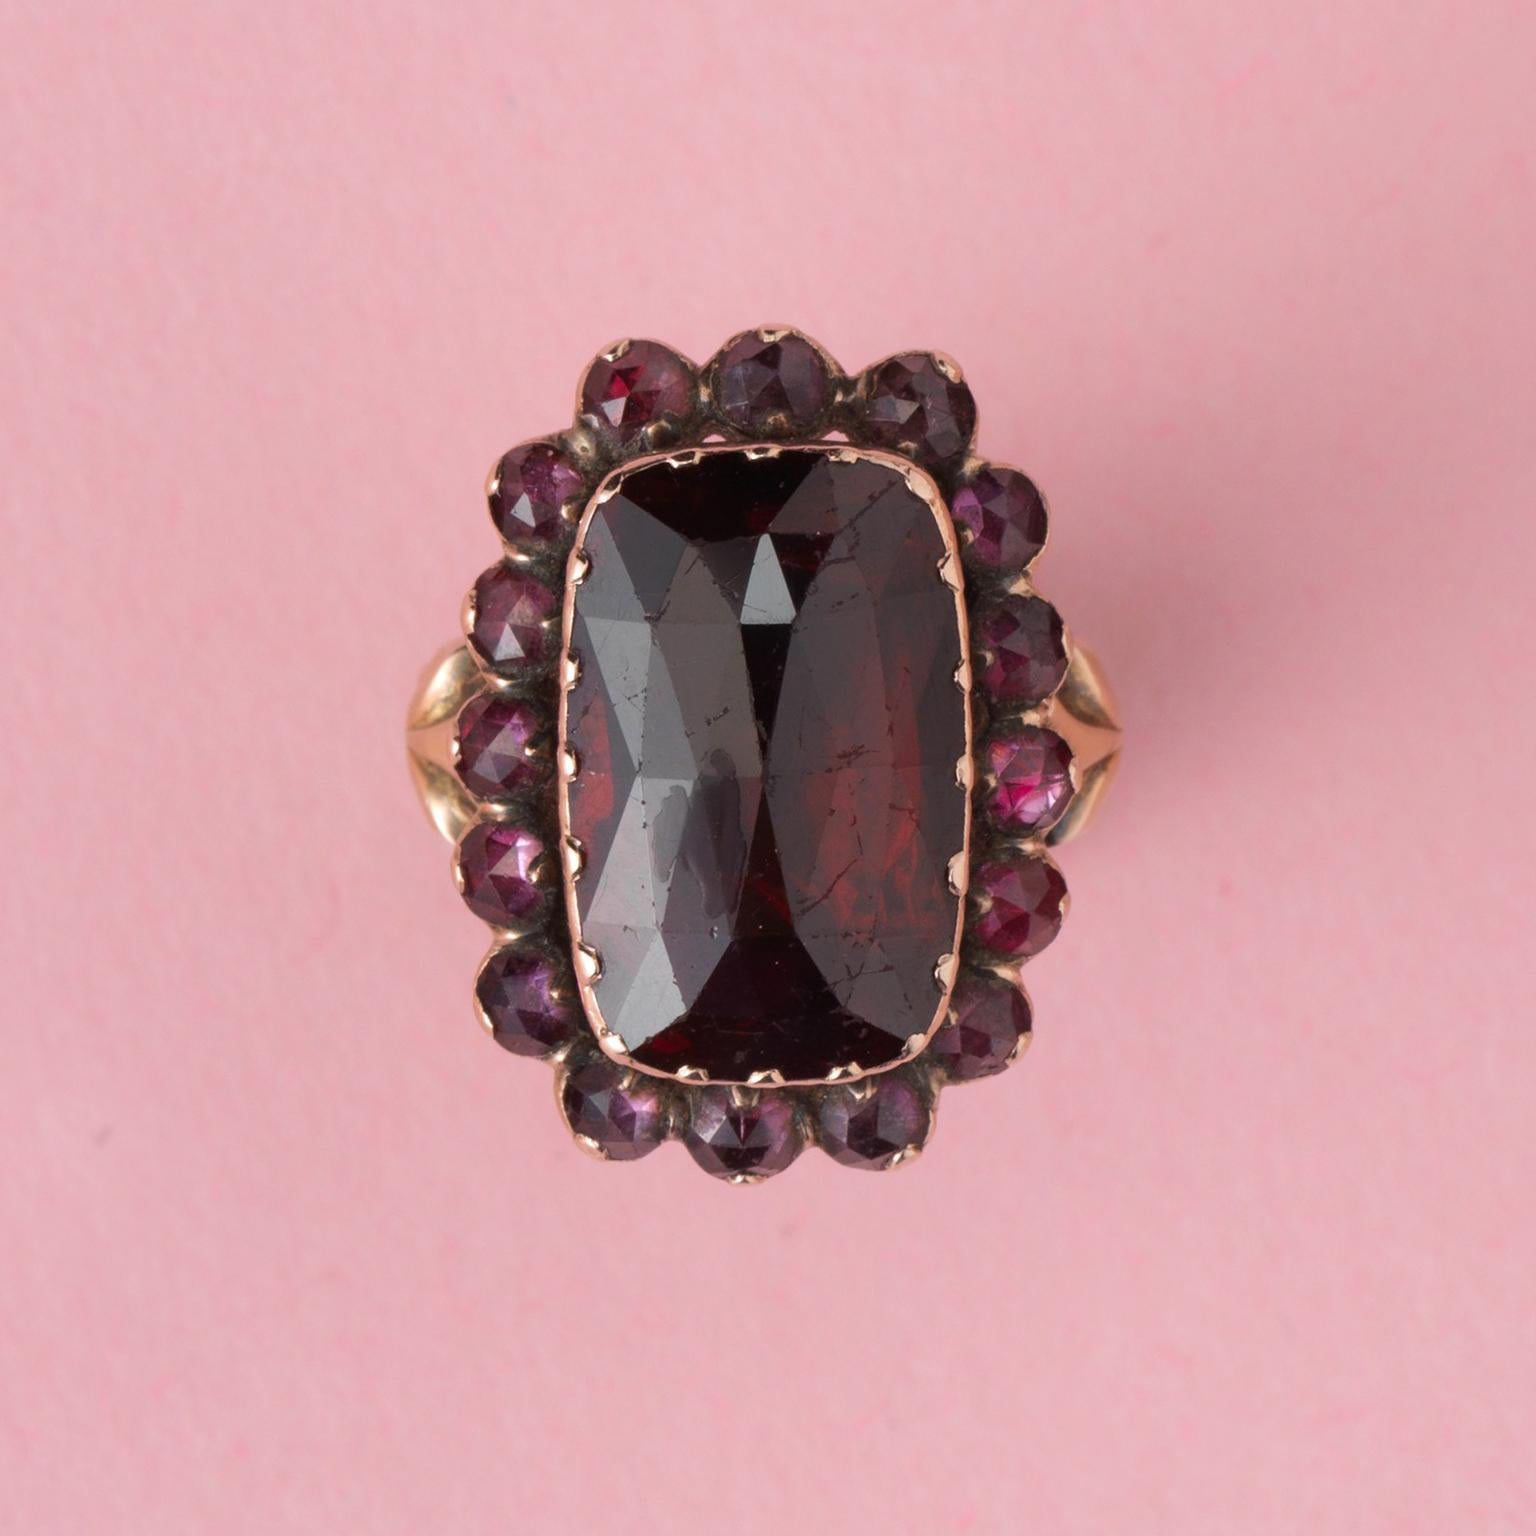 An 18 carat gold ring with a large rose cut rhodolite garnet and a border of small round rose cut garnets, all set on gold foil, marked with the tête de coq, Perpignan, France, circa 1820.

weight: 6.97 grams
ring size: 15.75 mm